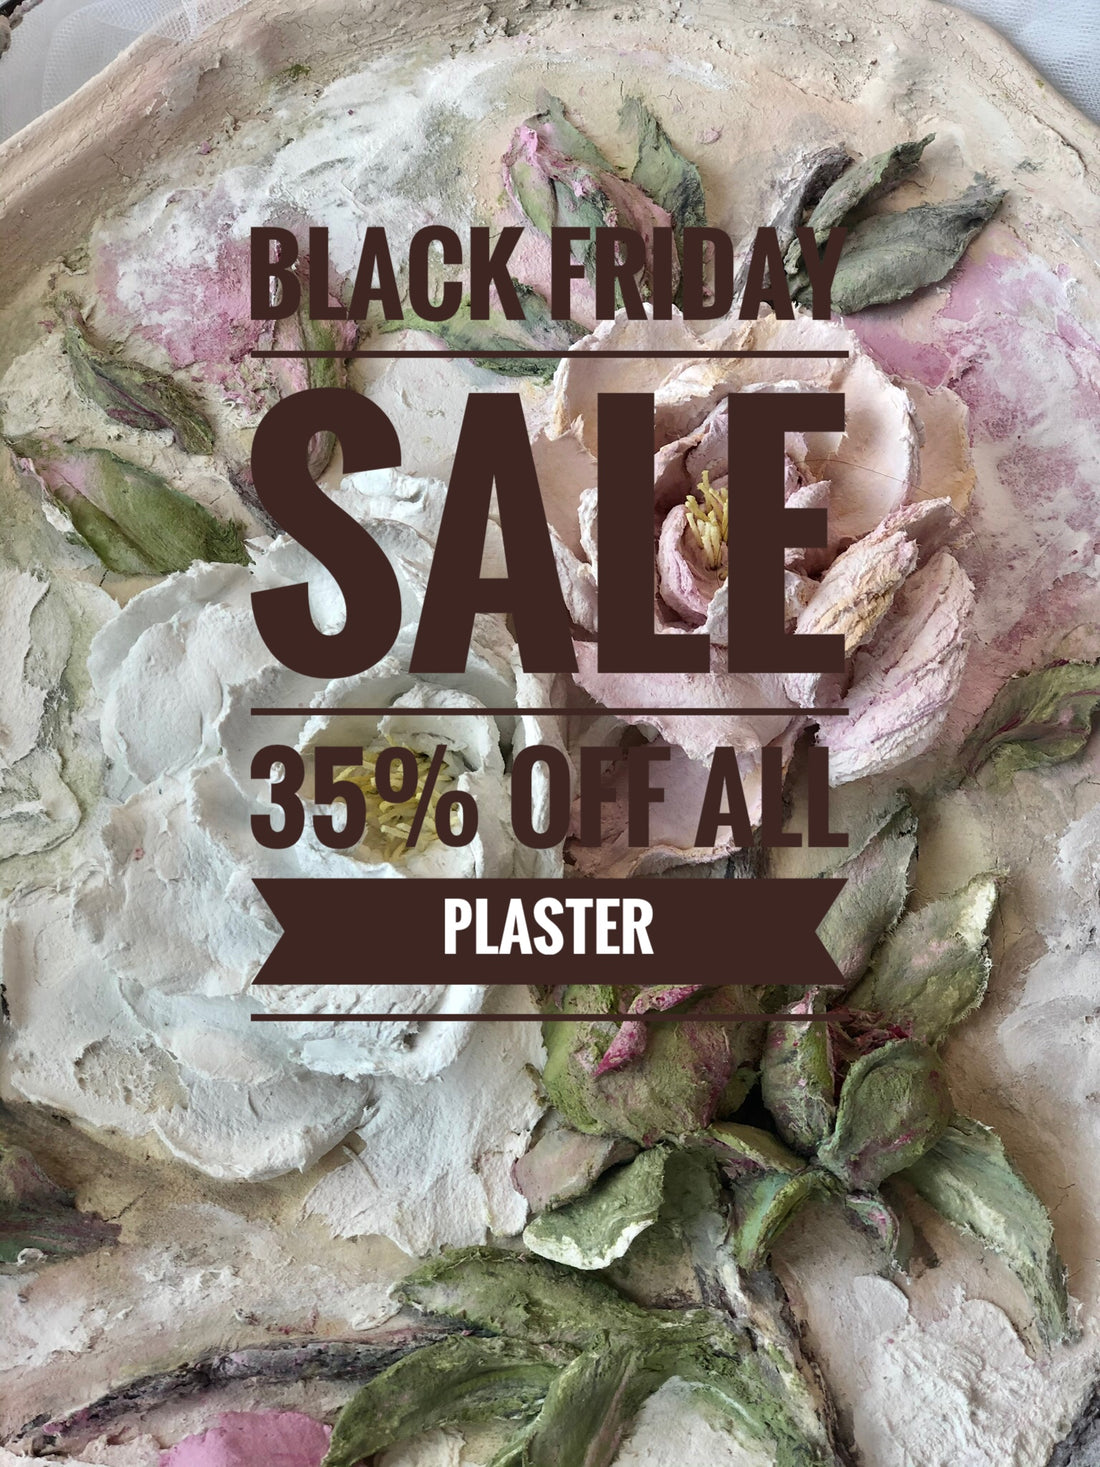 BLACK FRIDAY SALE! 35% Off All Plaster, Mats, and Wood Plaques